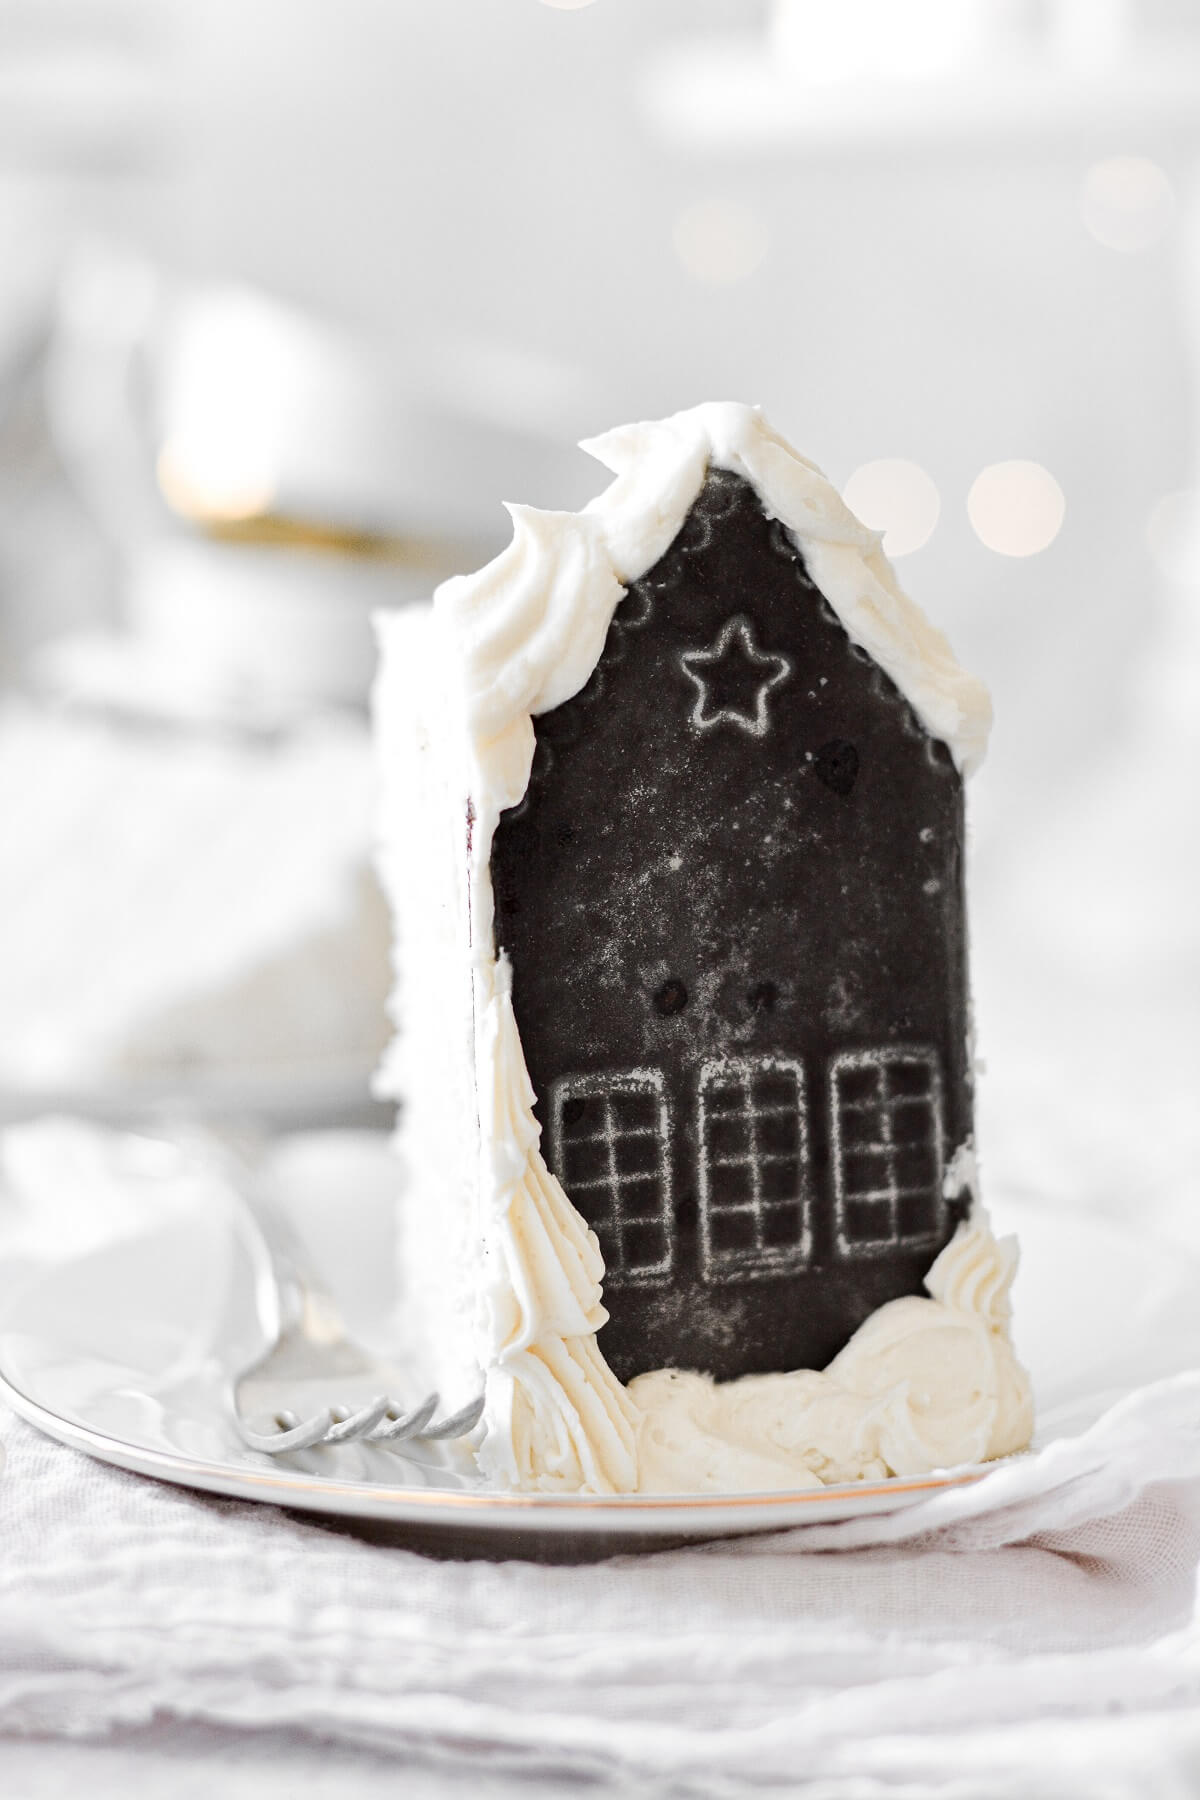 A slice of white velvet cake, with an iced chocolate shortbread cookie decorated like a house for Christmas.